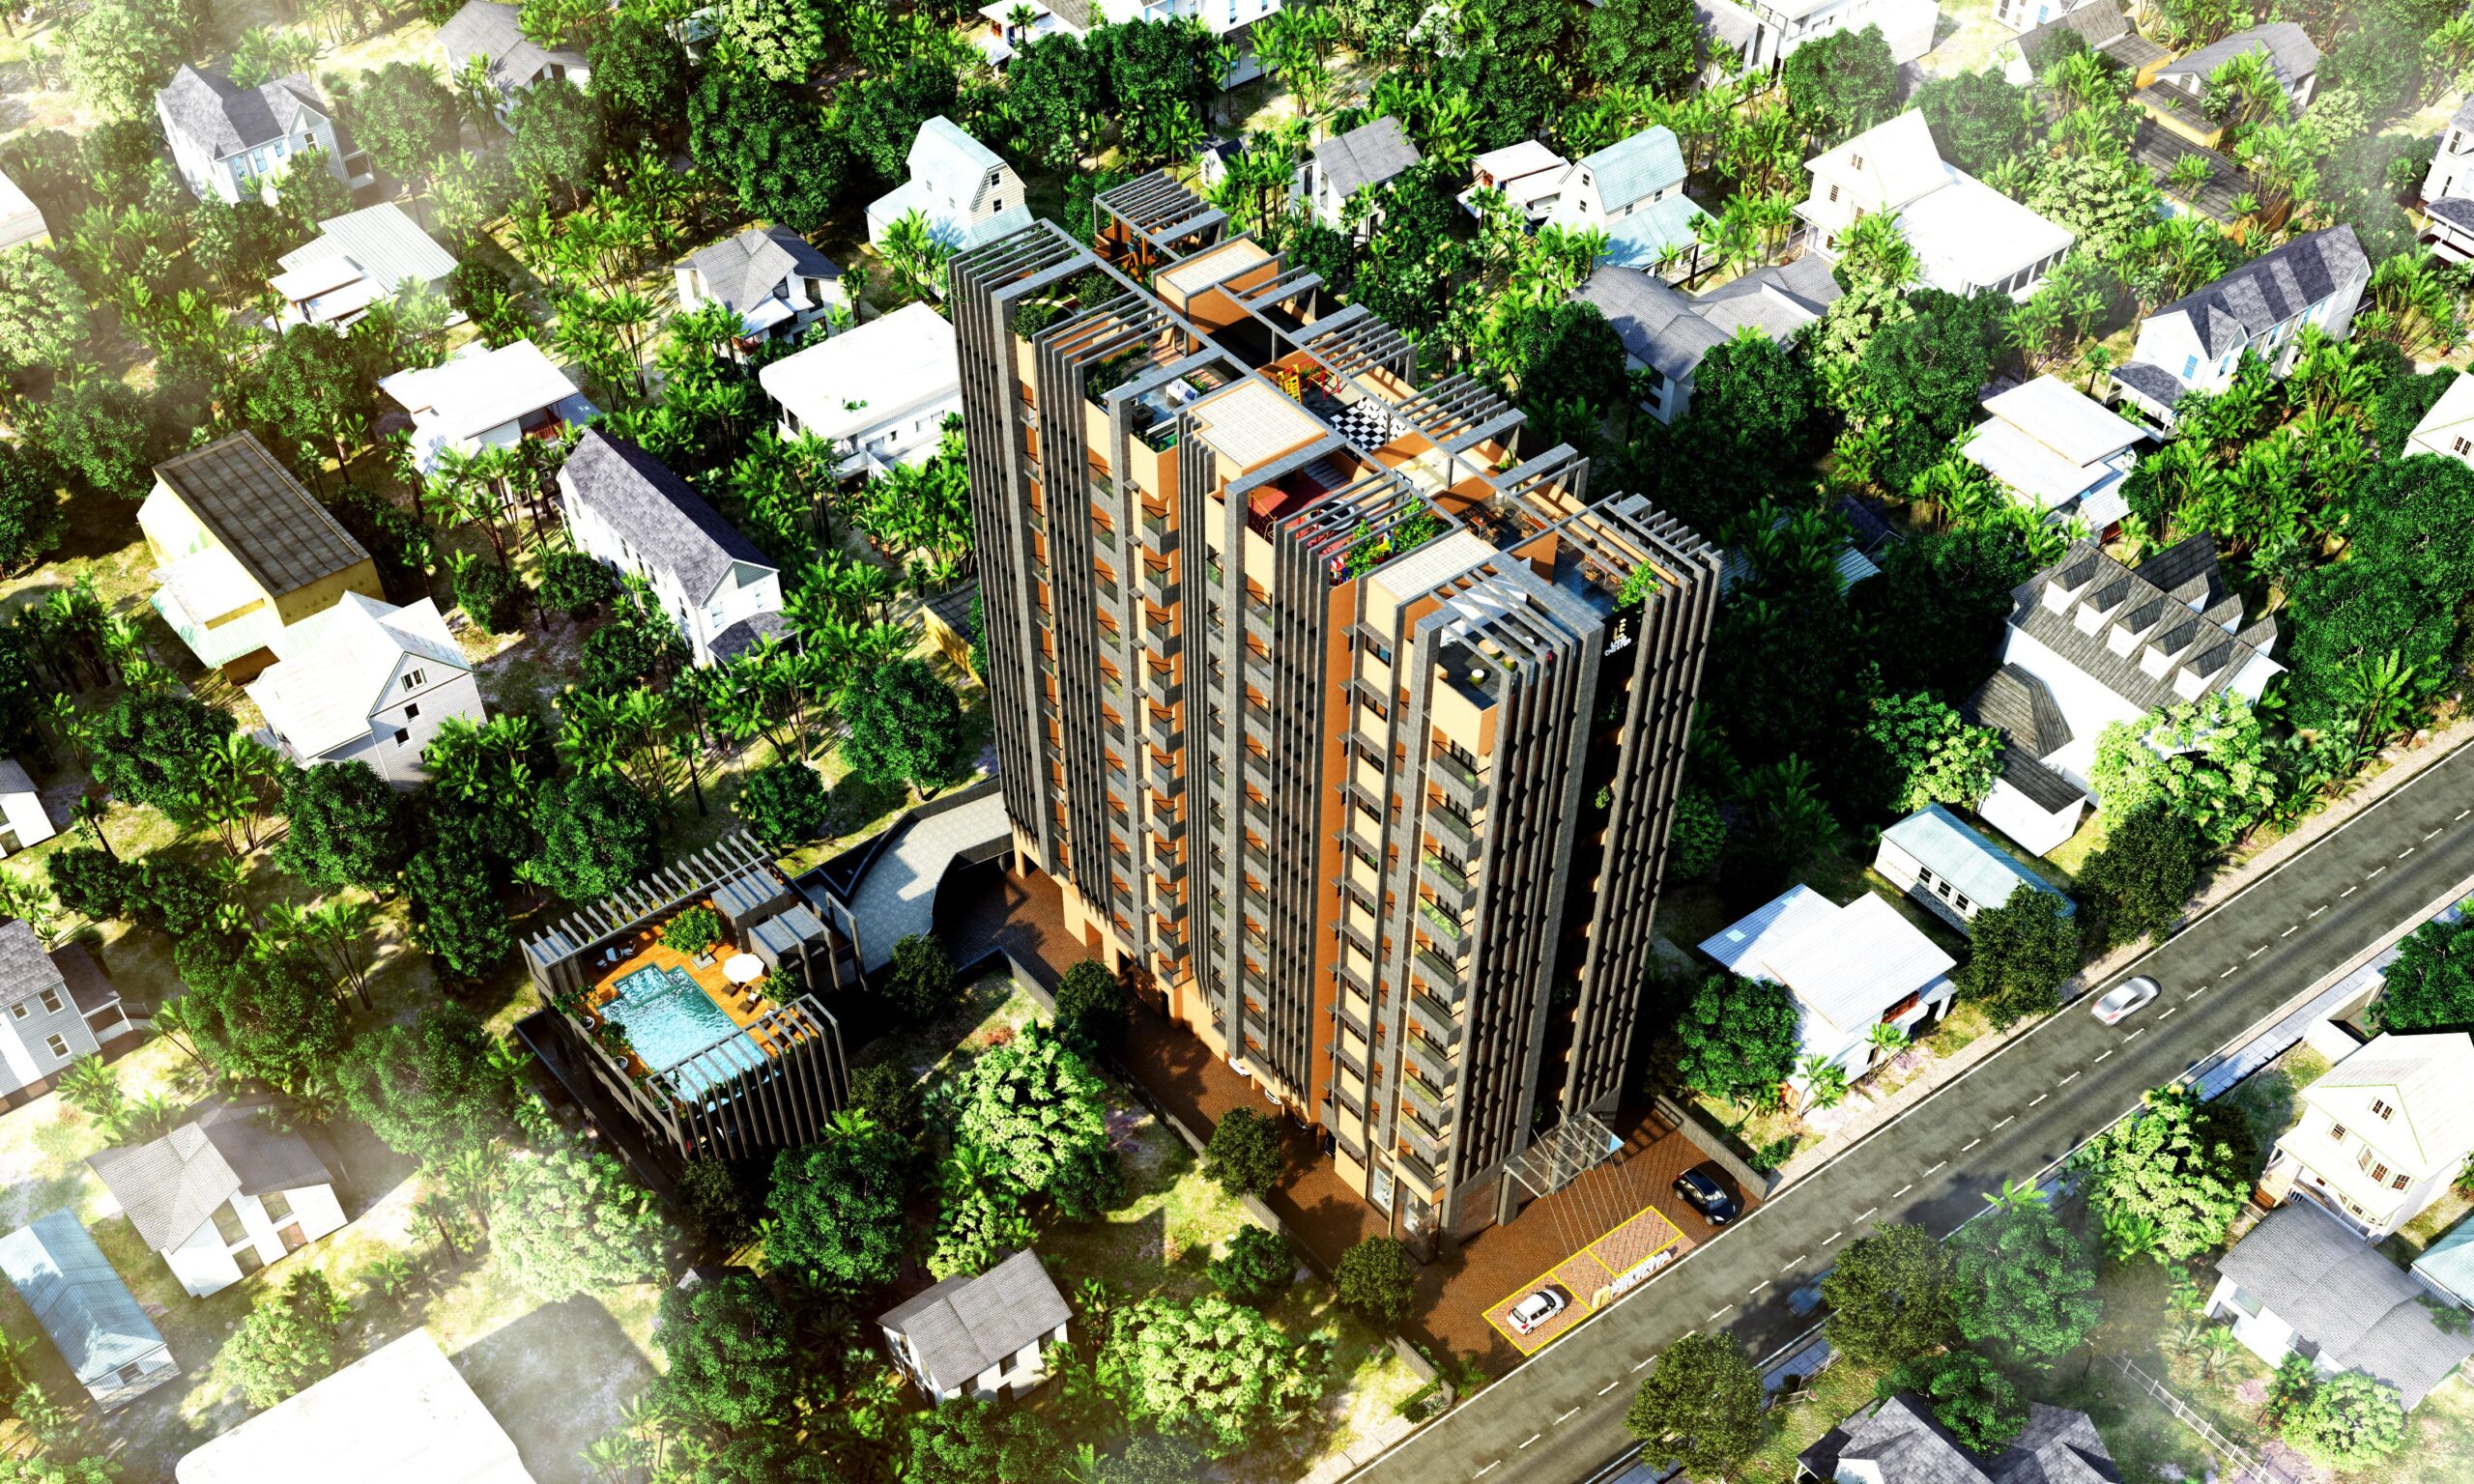 Experion Sector 53 Gurgaon: Modernity, Convenience and Luxury